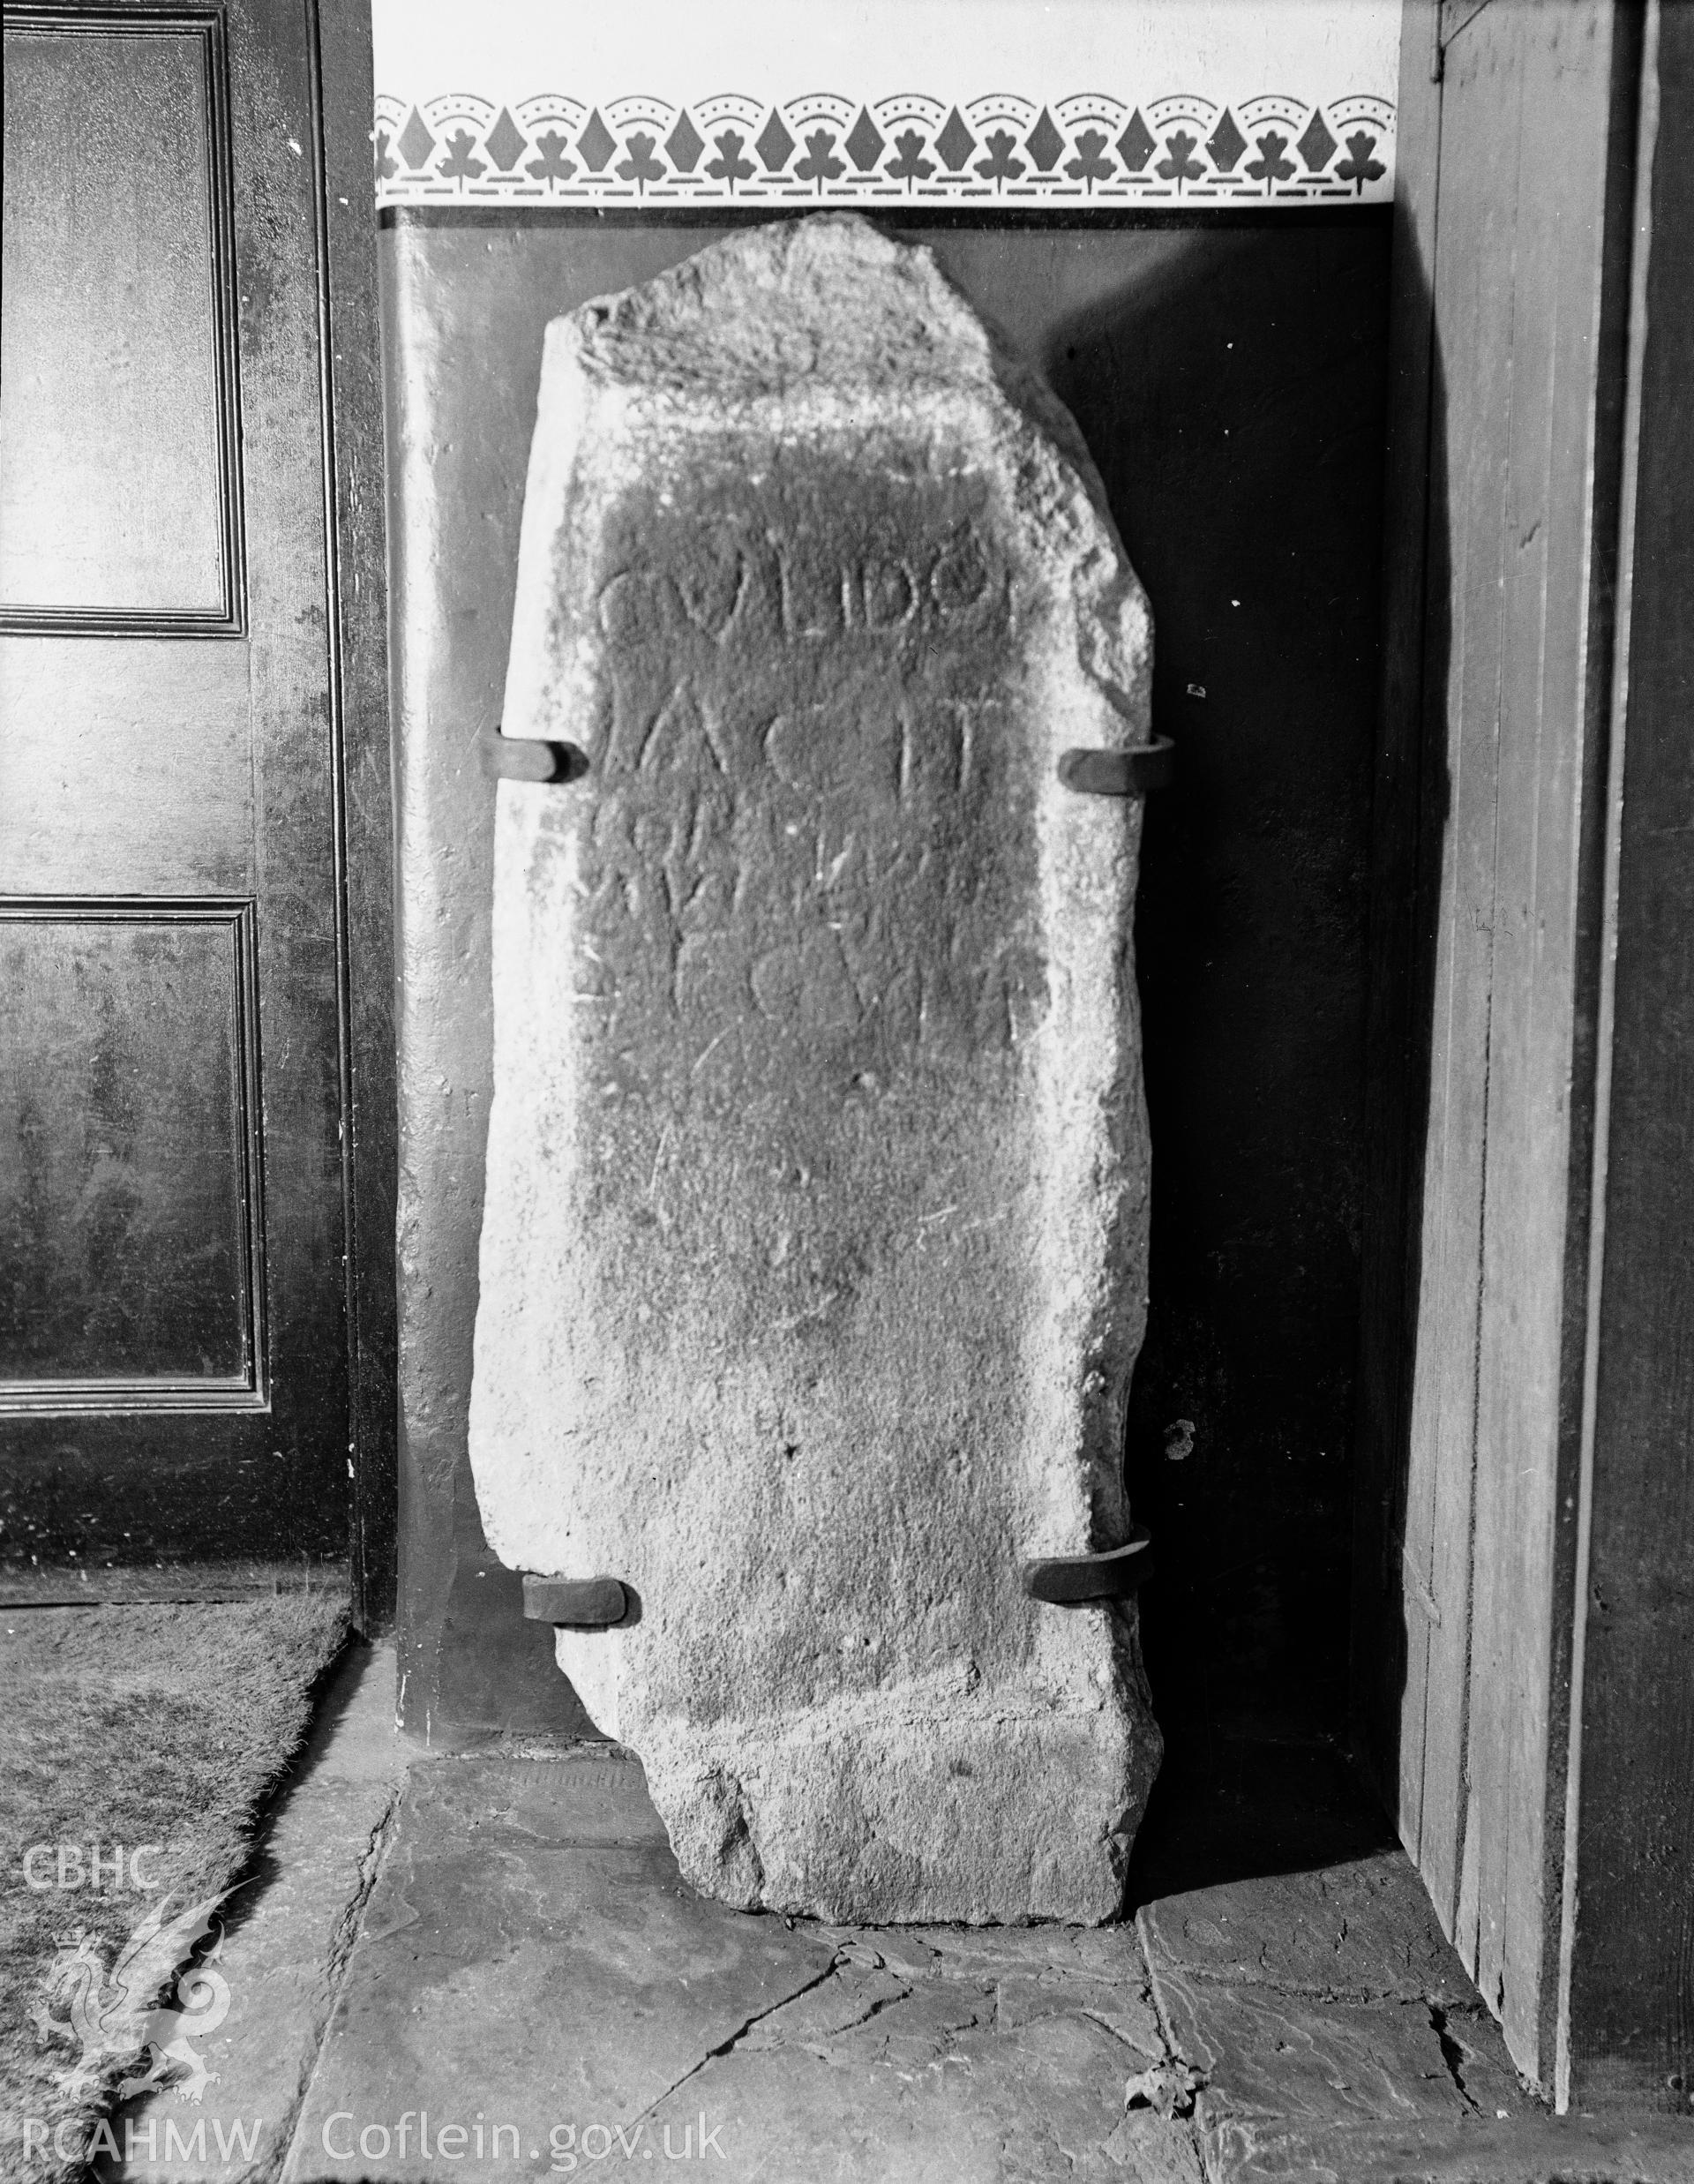 View of inscribed stone